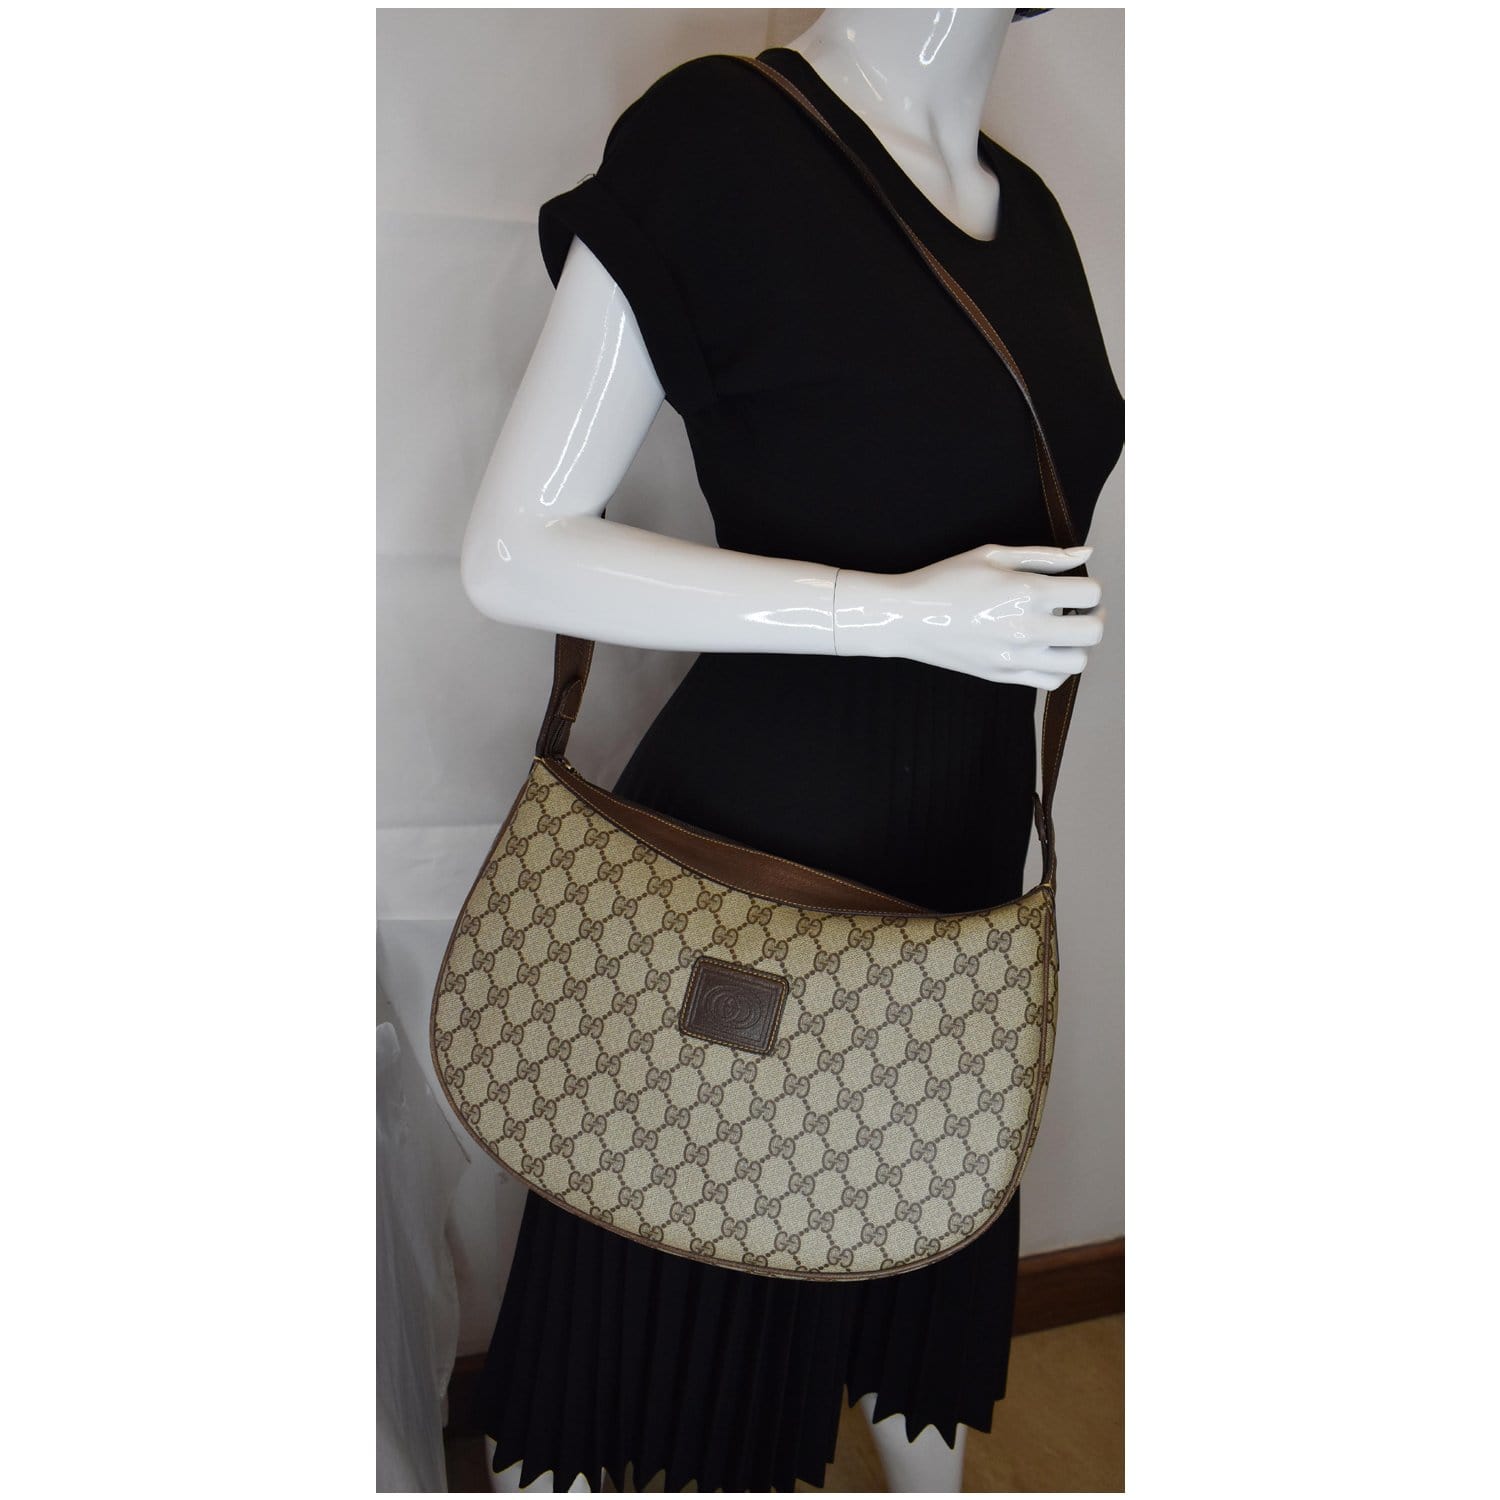 Gucci, Bags, Gucci Vintage Scarf Neverfull Bag